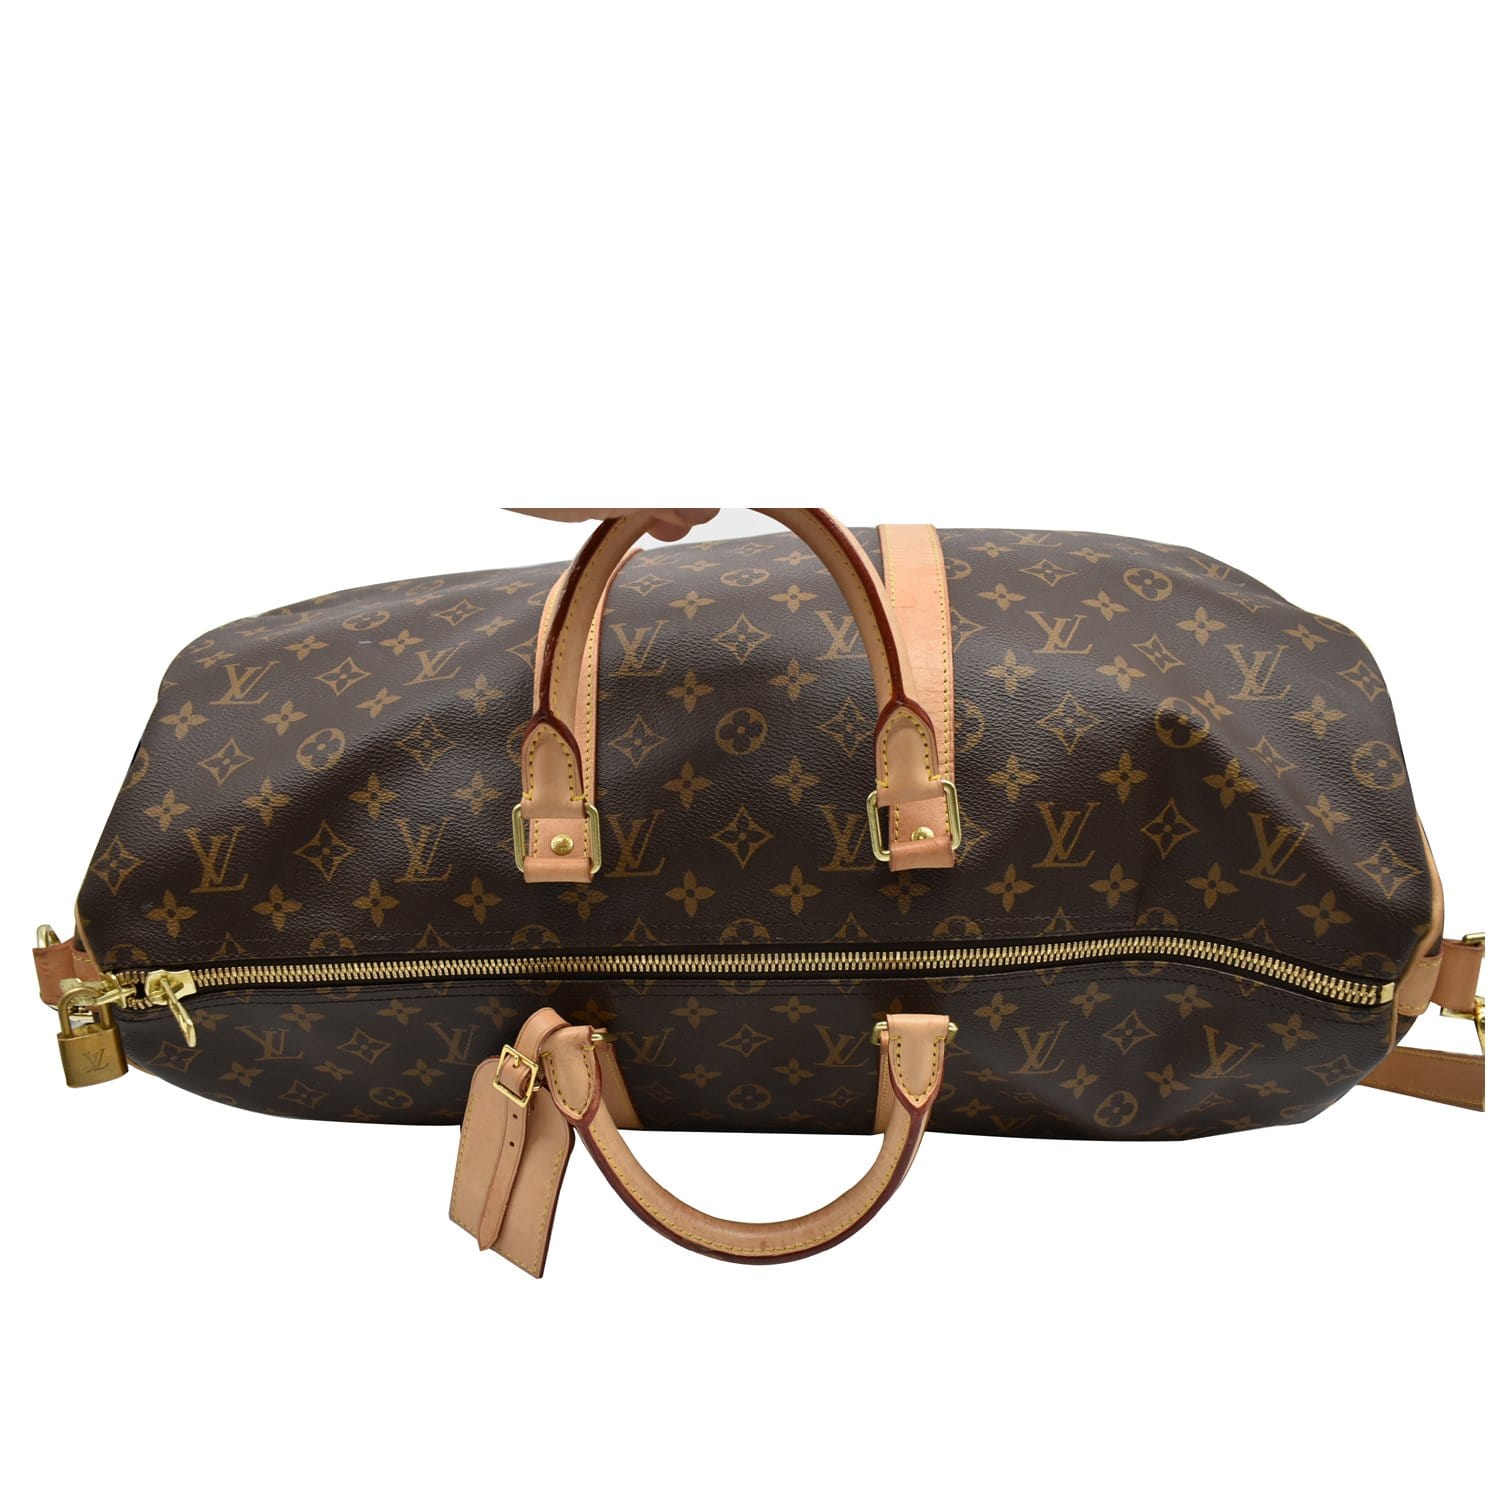 Louis Vuitton pre-owned Keepall 50 travel bag, Brown